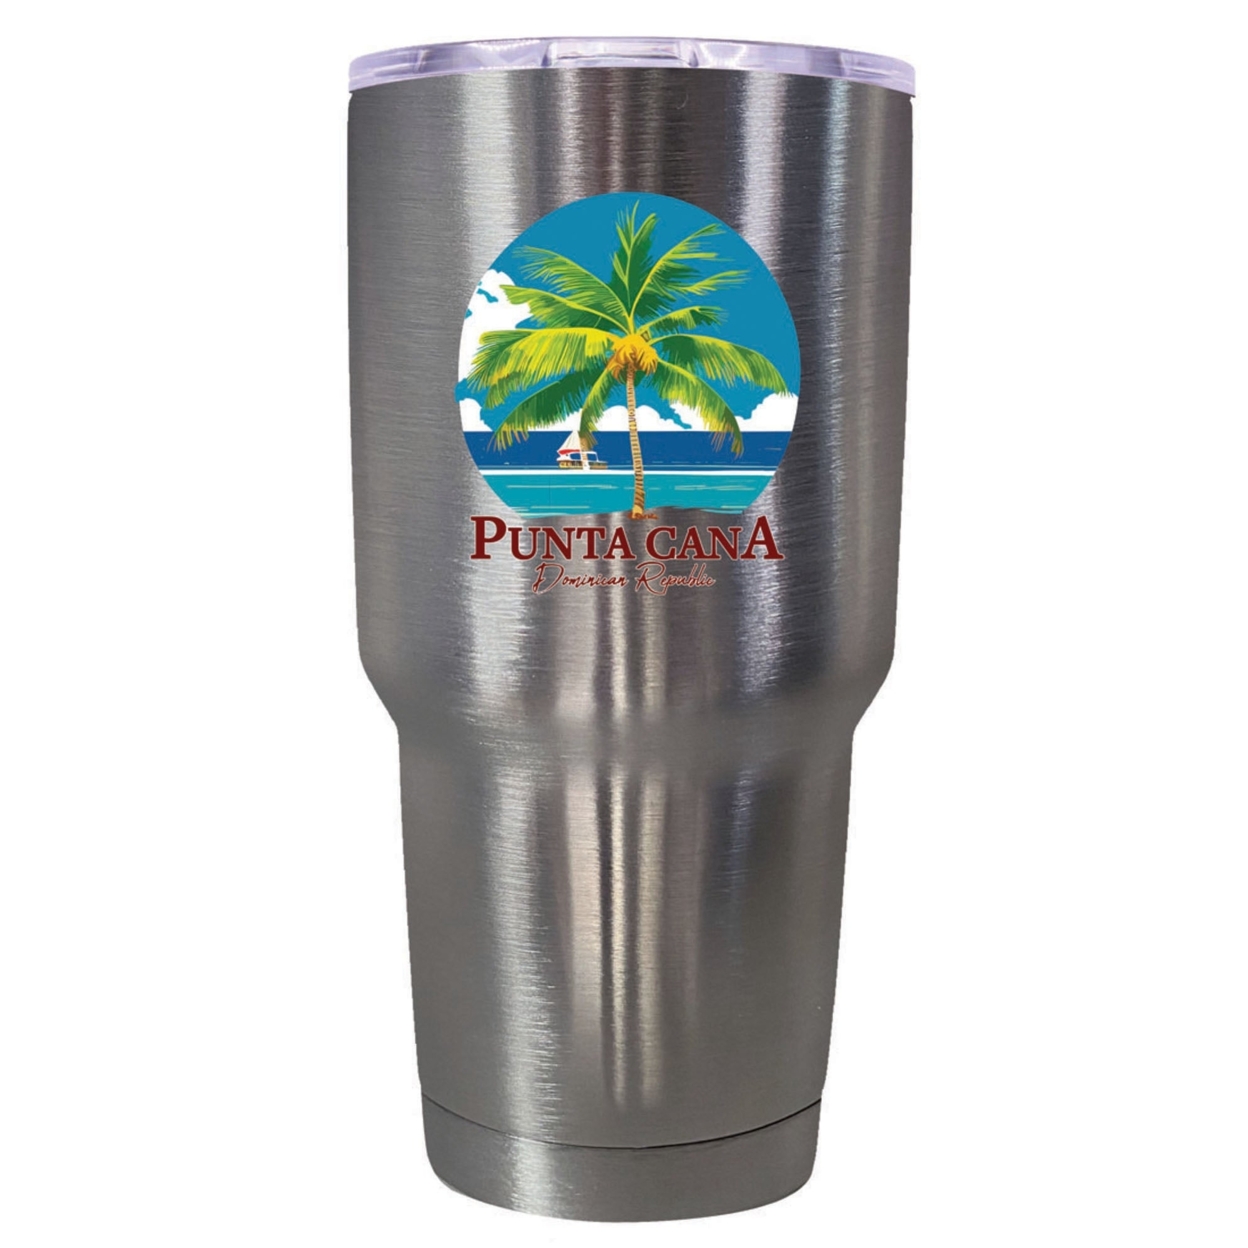 Punta Cana Dominican Republic Souvenir 24 Oz Insulated Stainless Steel Tumbler - Black, PARROT